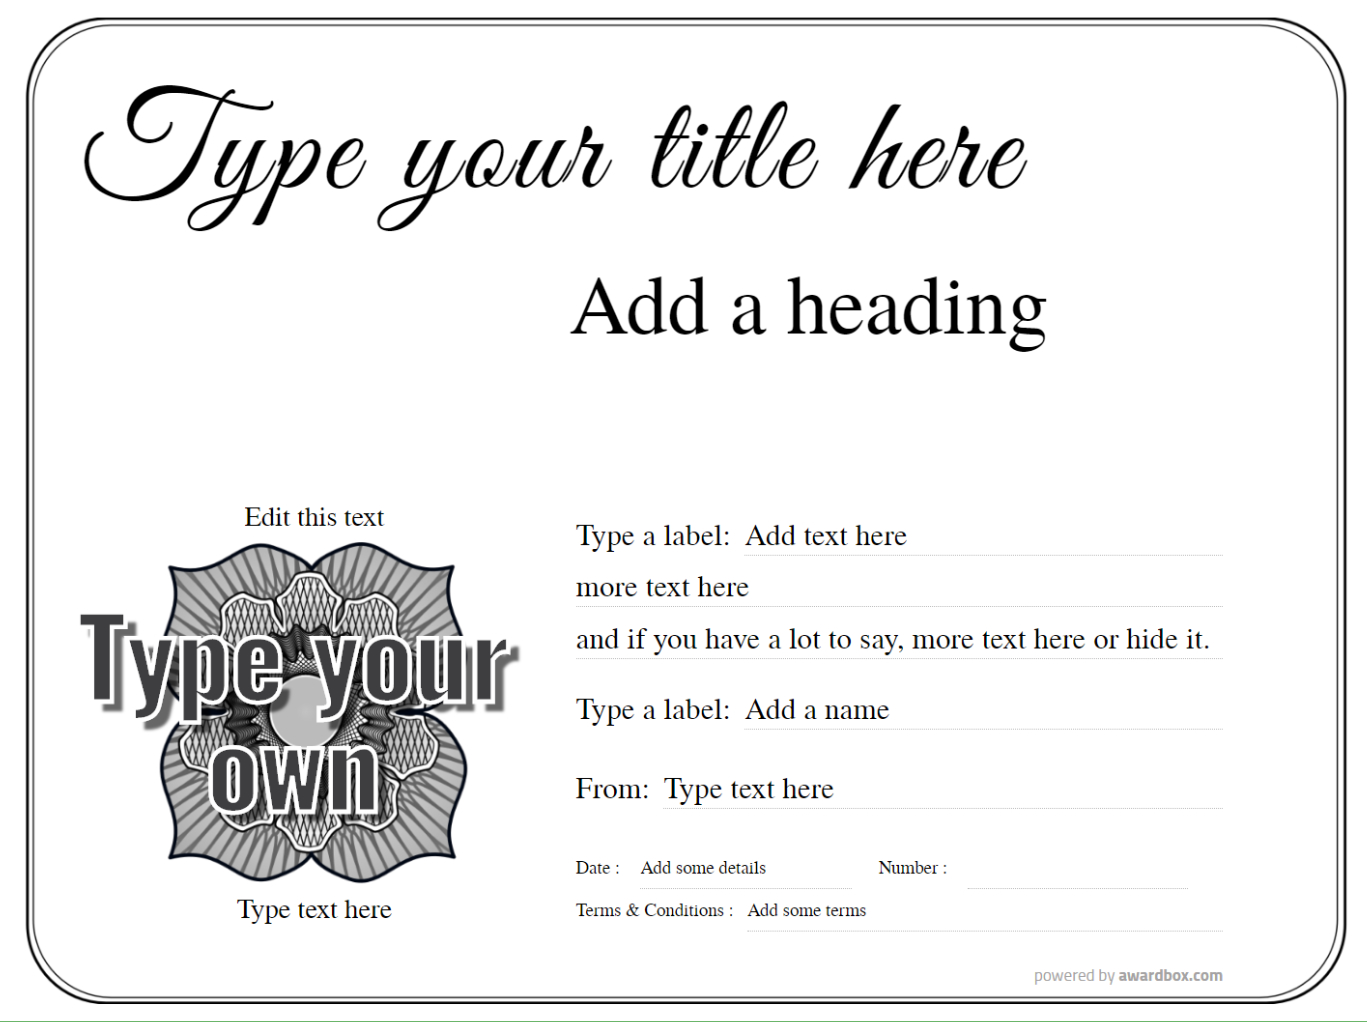 Free Gift Certificate Templates And Ideas Fully Editable